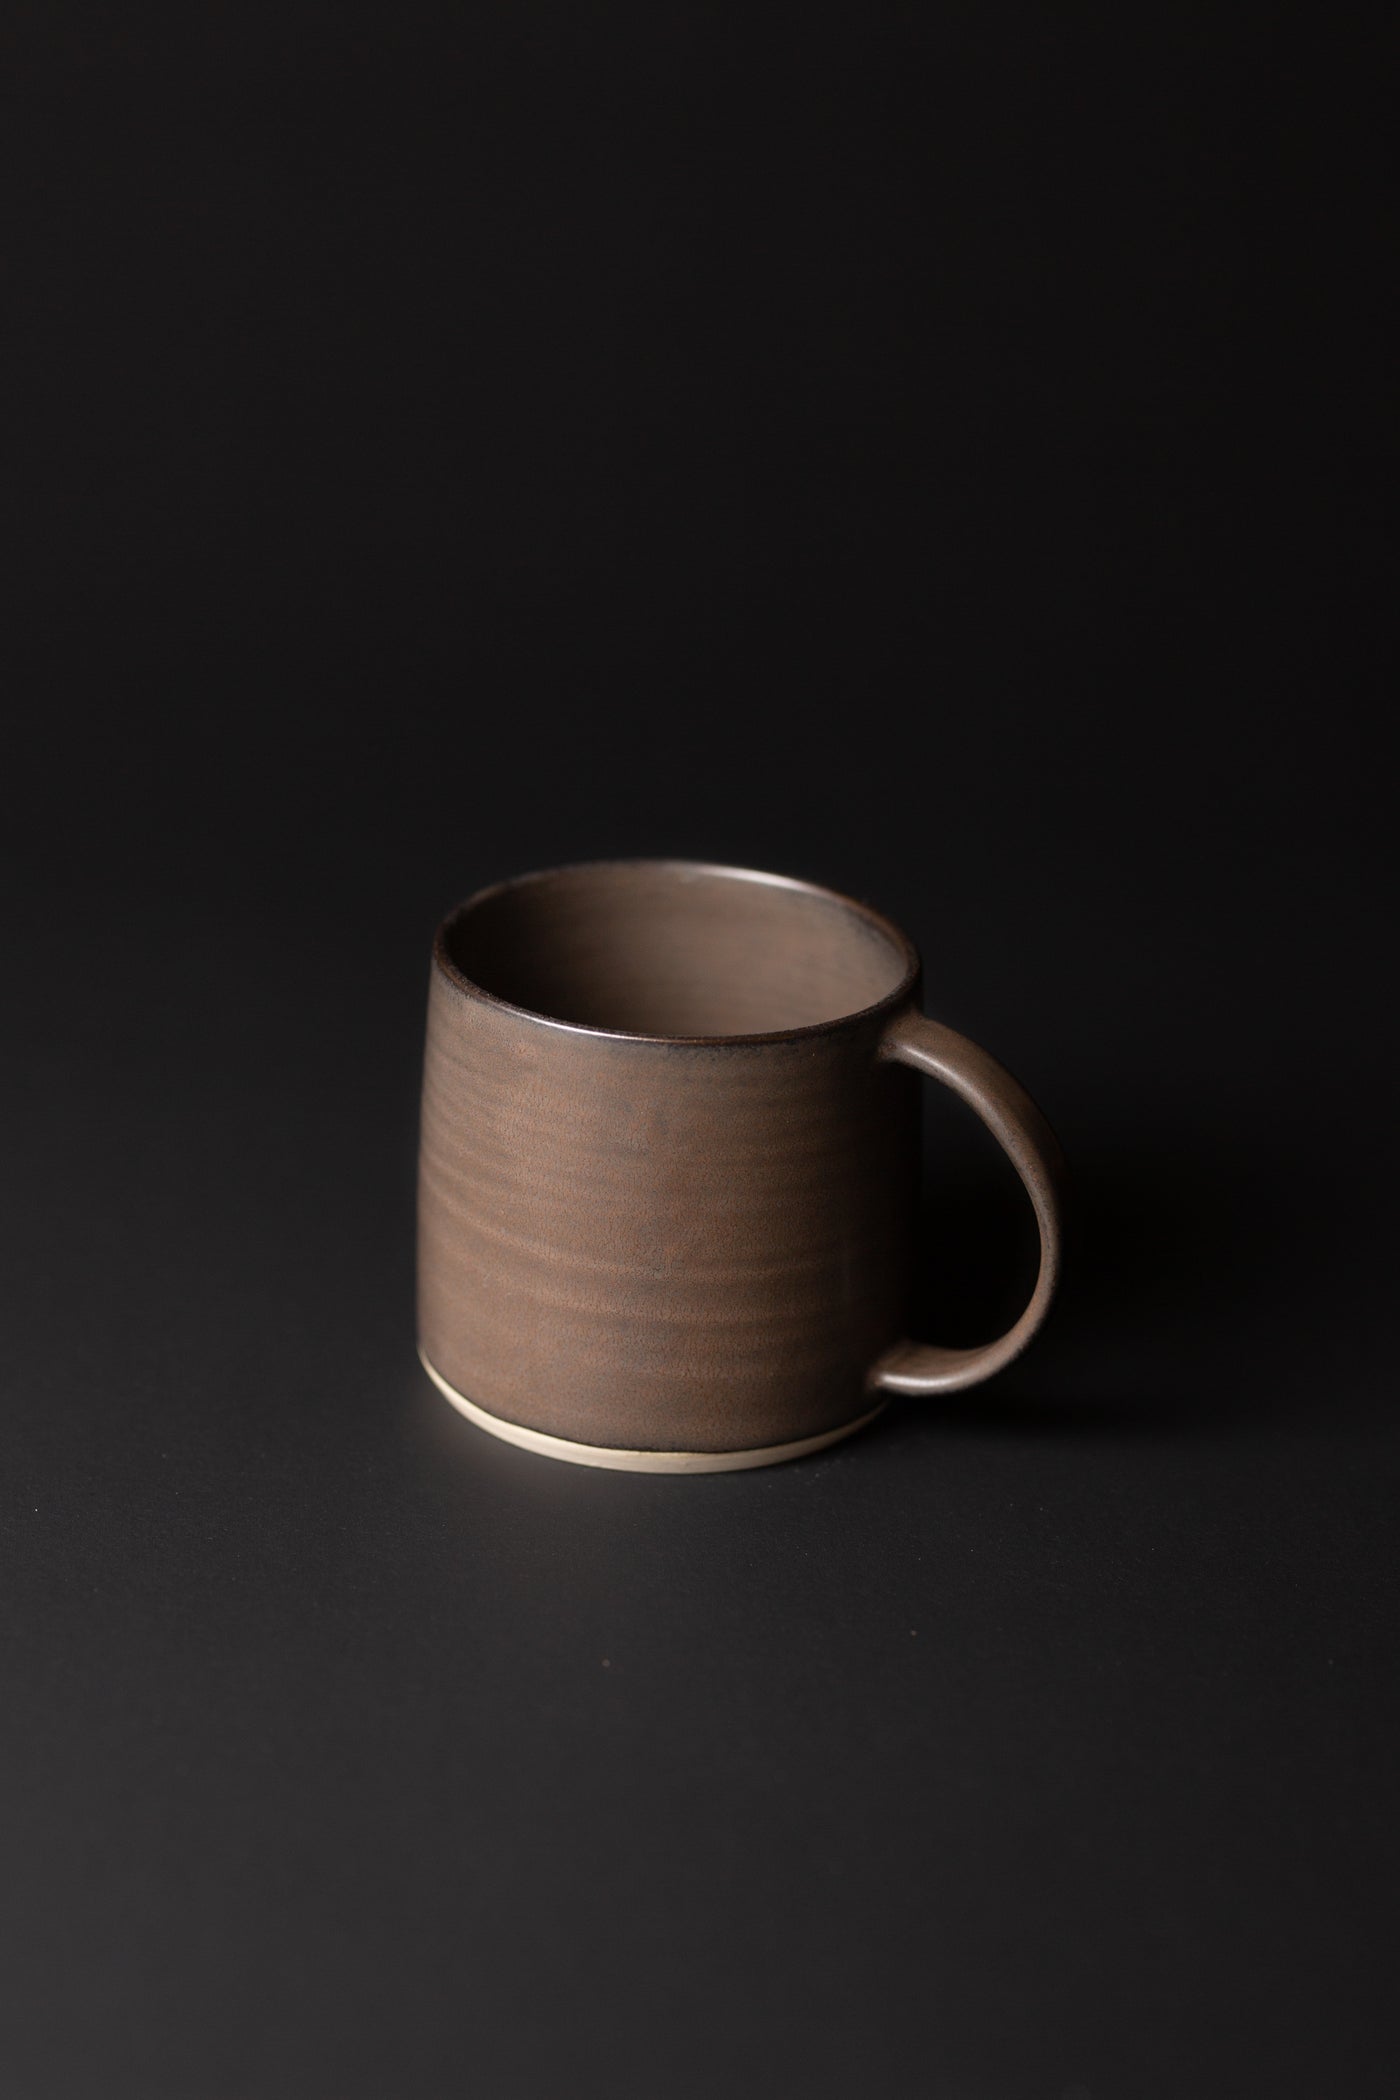 Handcrafted in natural tones and organic in nature this smooth mug is a fine Australian homeware piece. Type: Mug   Material: Stoneware  Dimensions: 80 x 135mm (450ml)